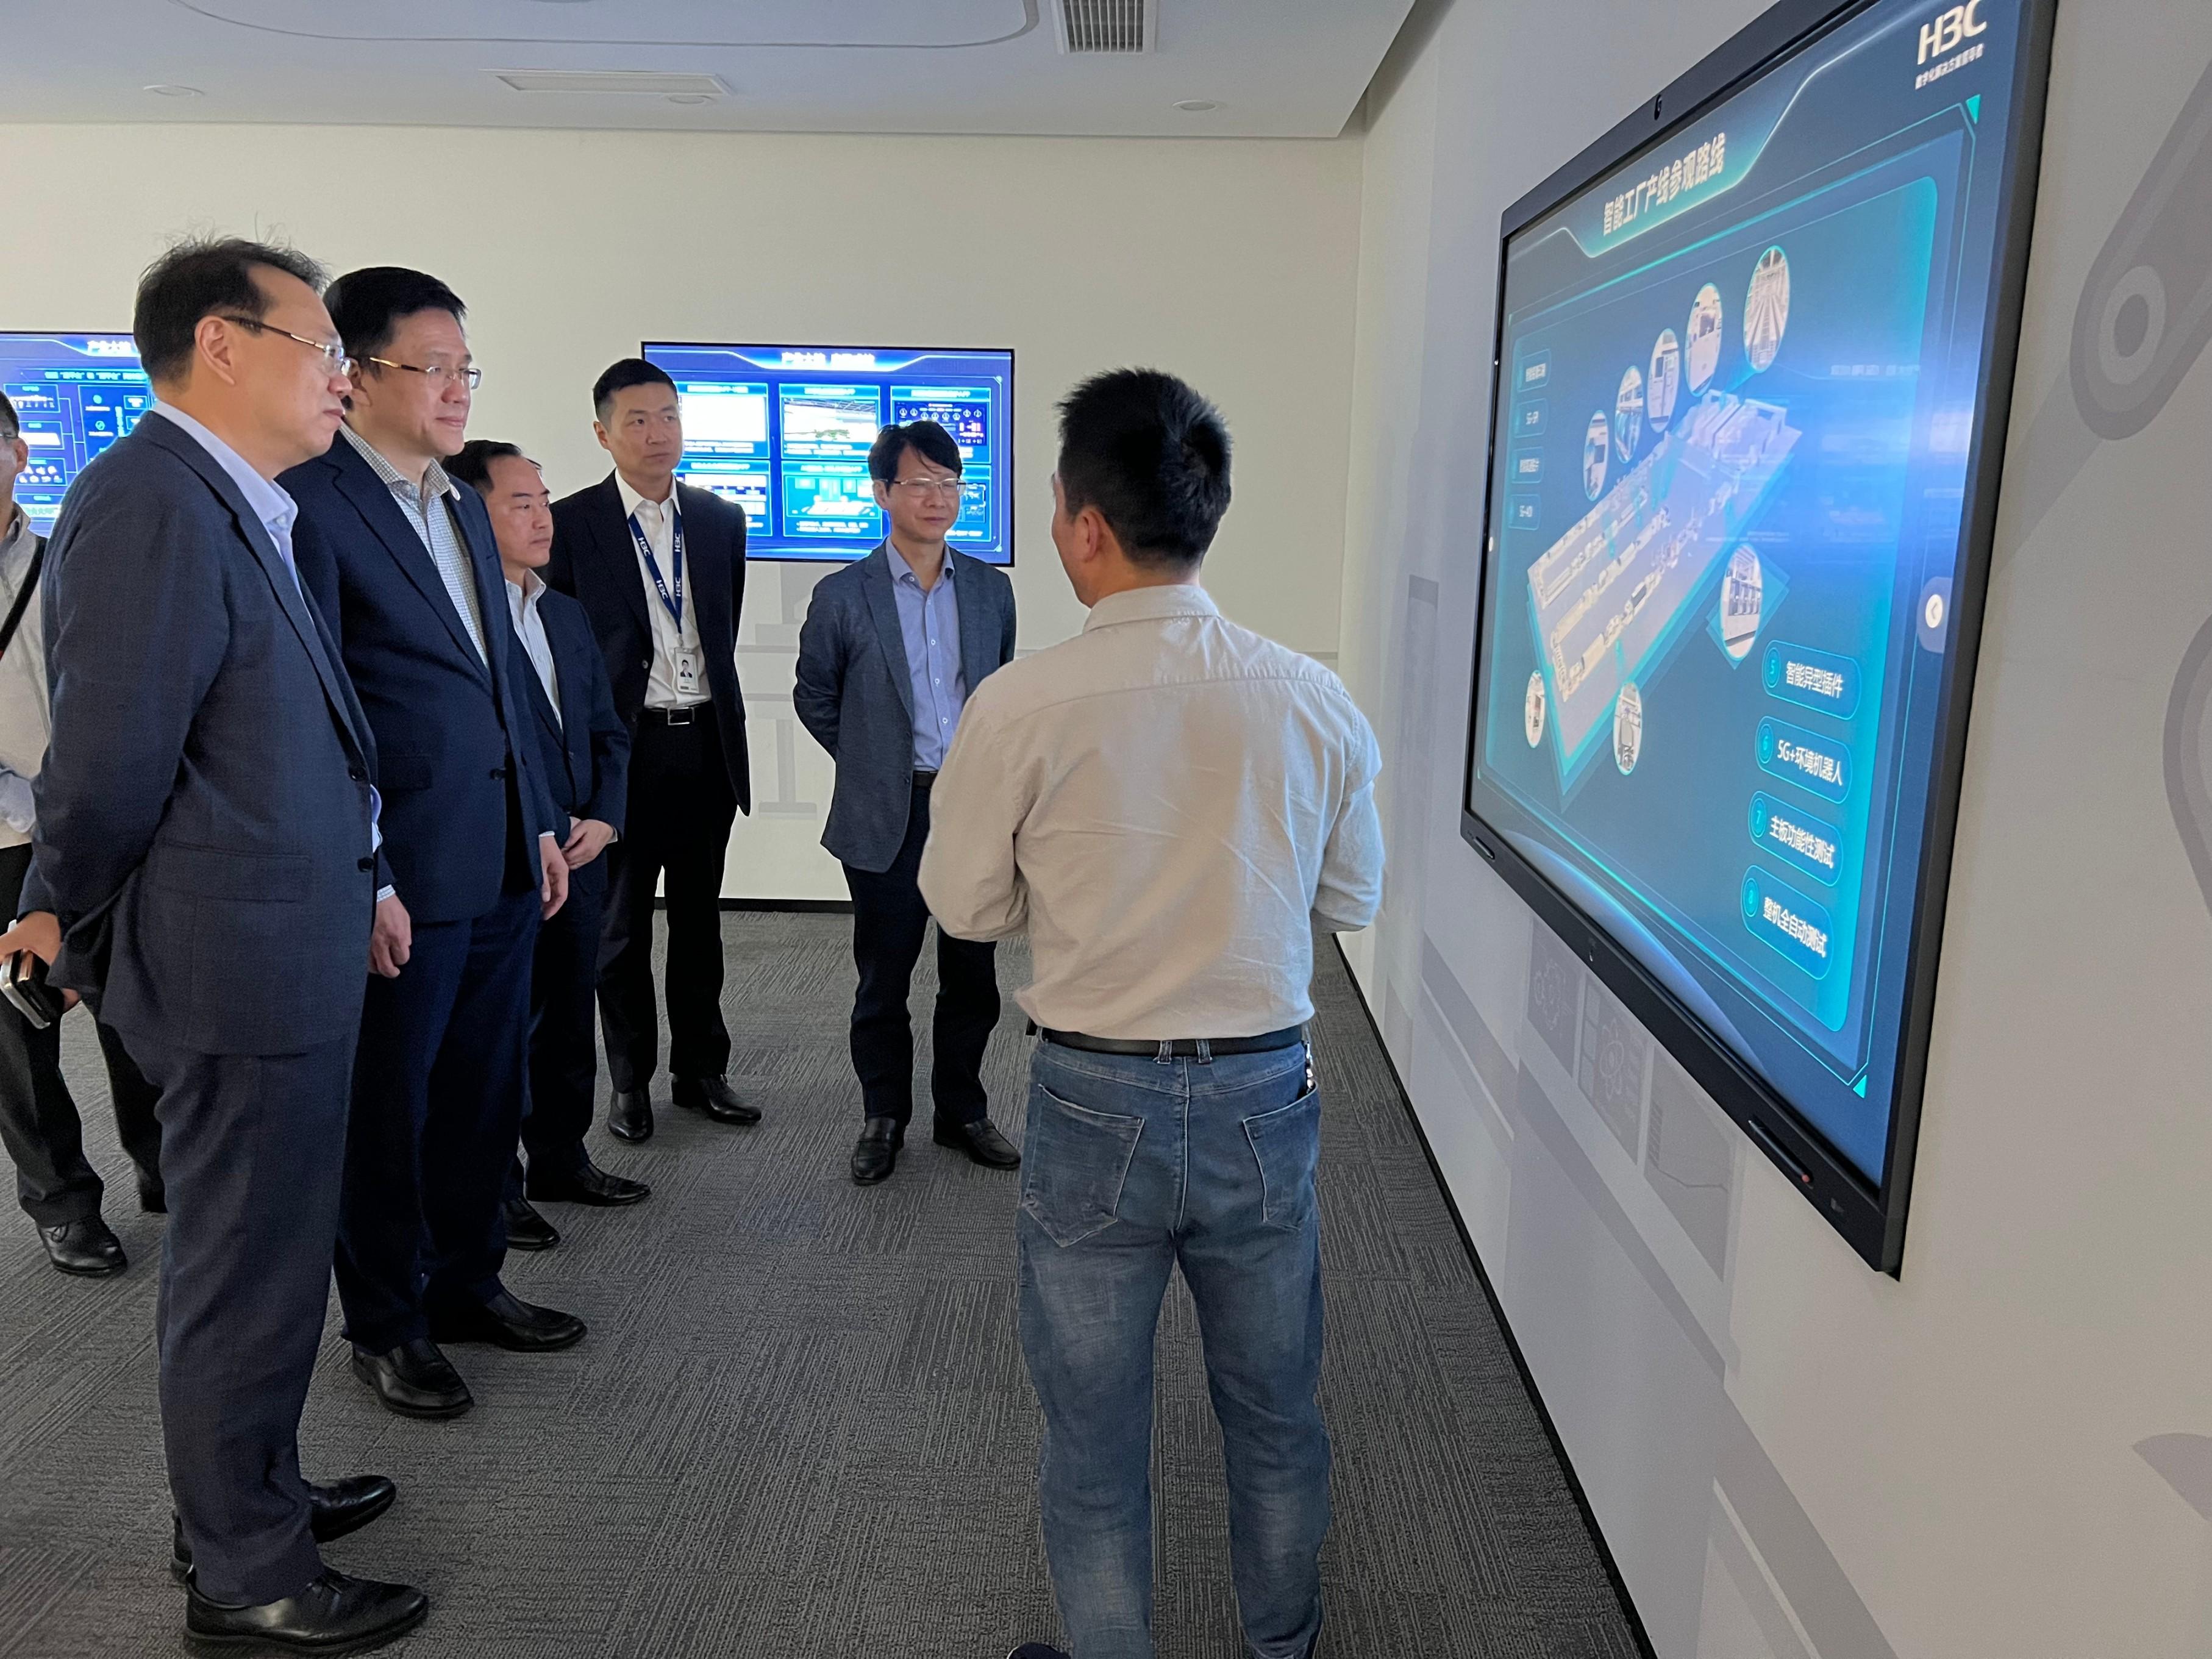 The Secretary for Innovation, Technology and Industry, Professor Sun Dong (second left), conducts a study on the Hangzhou Headquarters of H3C, a subsidiary of Unisplendour Corporation Limited, today (November 8) by visiting the headquarters' future factory. Next to Professor Sun is the Government Chief Information Officer, Mr Tony Wong (third left).